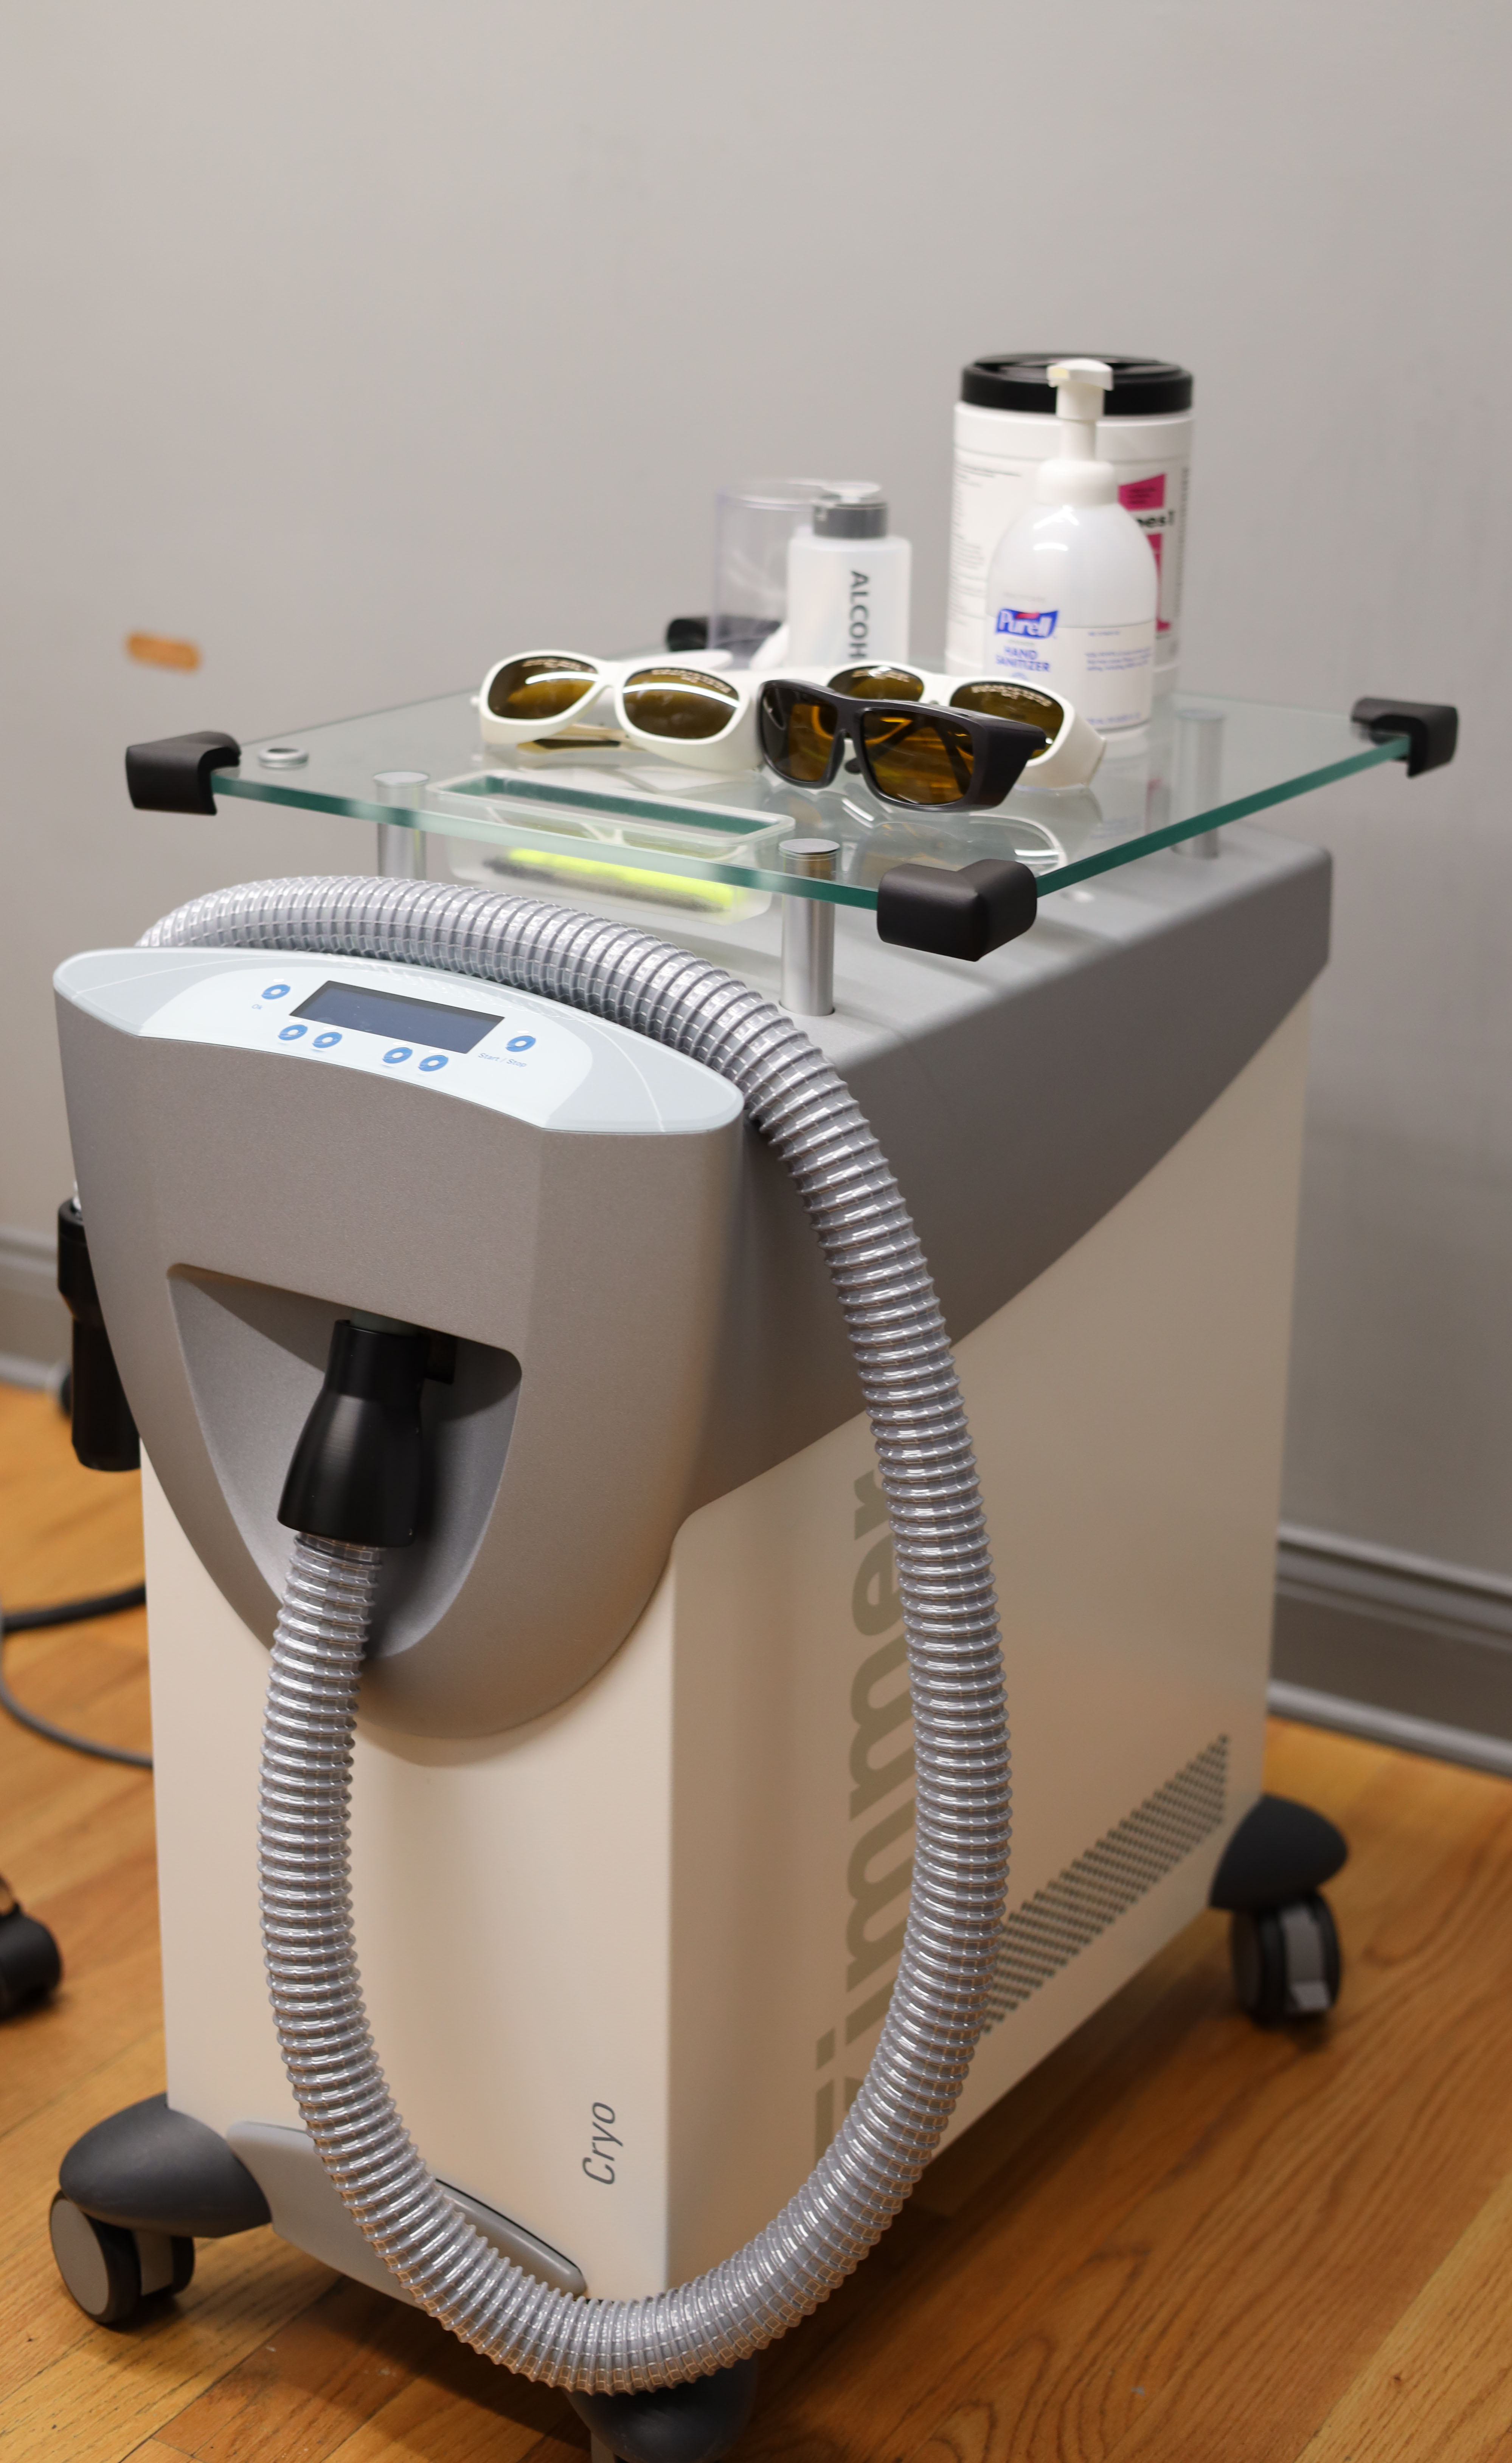 Removery's prep station setup on top of the Zimmer machine that is used to minimize patients' pain by emitting cool air. Photo by Billie Rollason.